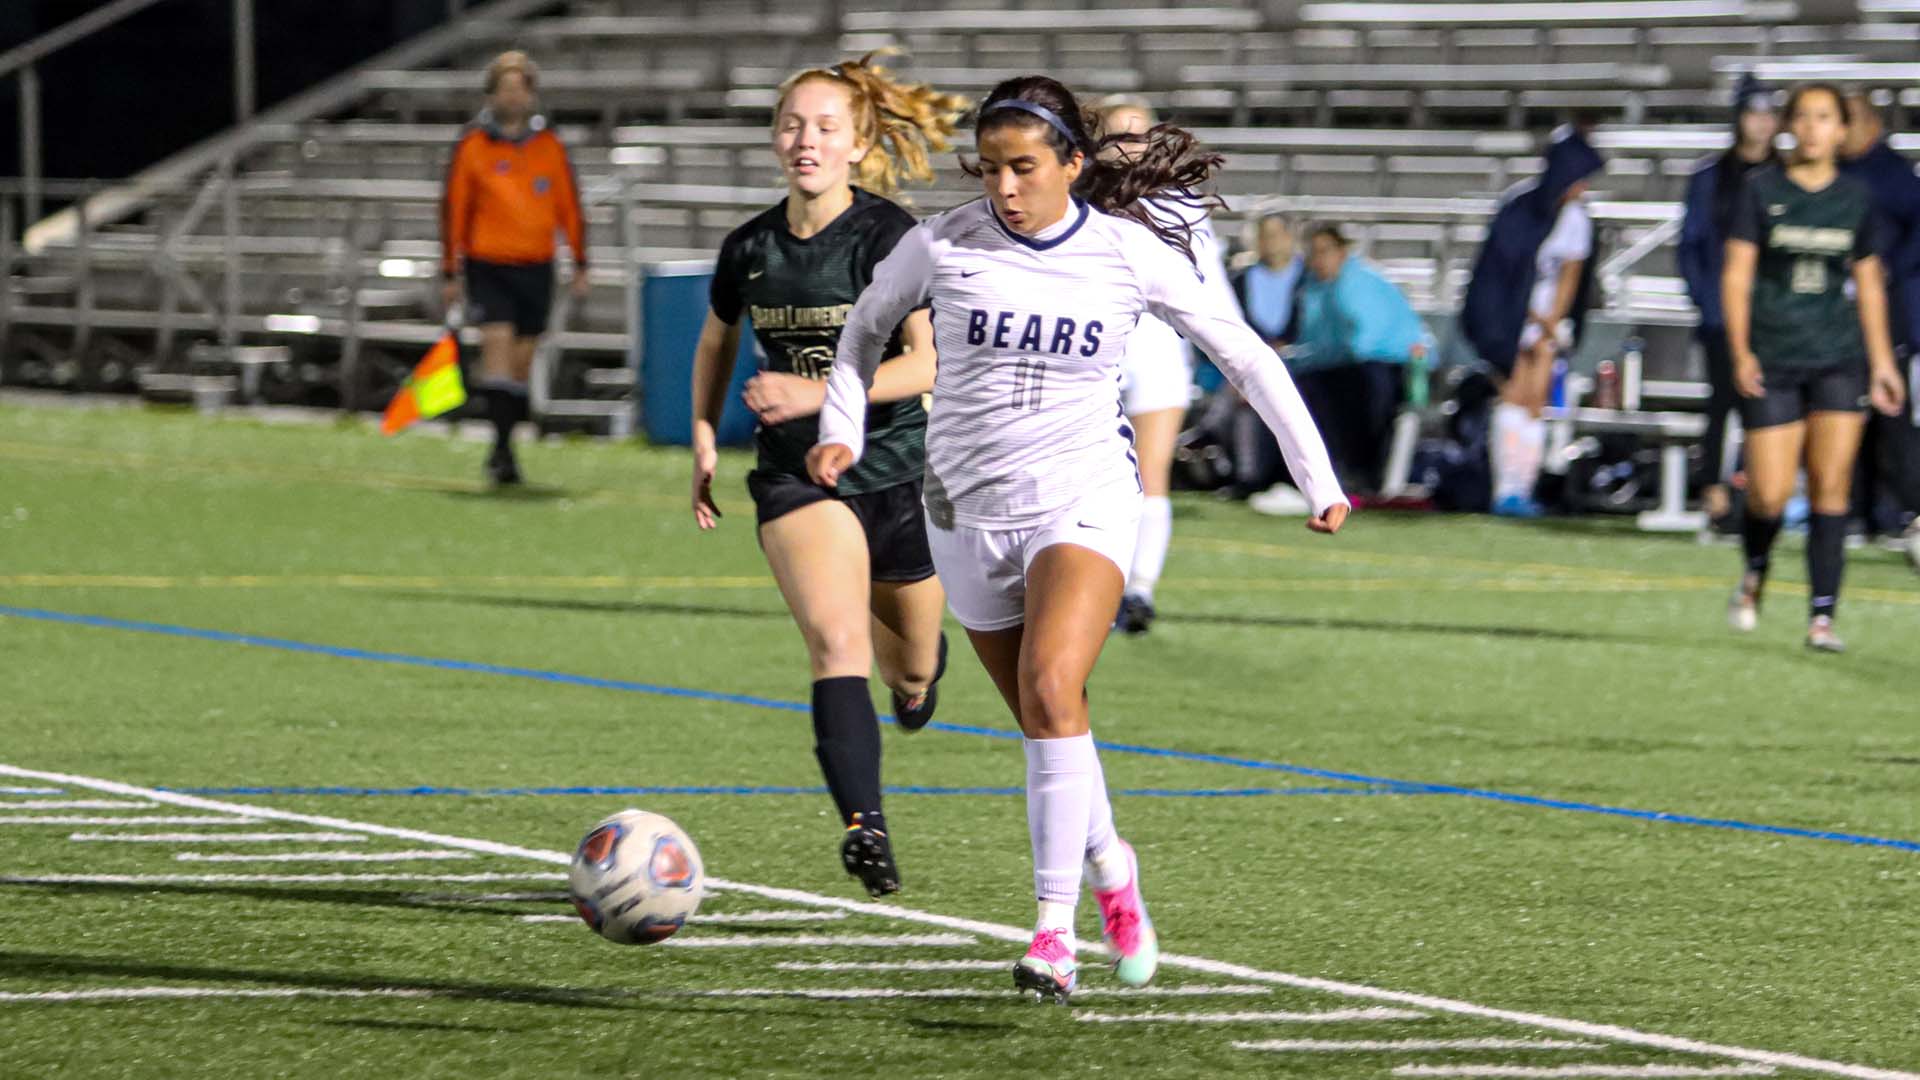 Women’s Soccer Caps Off Their Season in Winning Fashion Against Sarah Lawrence